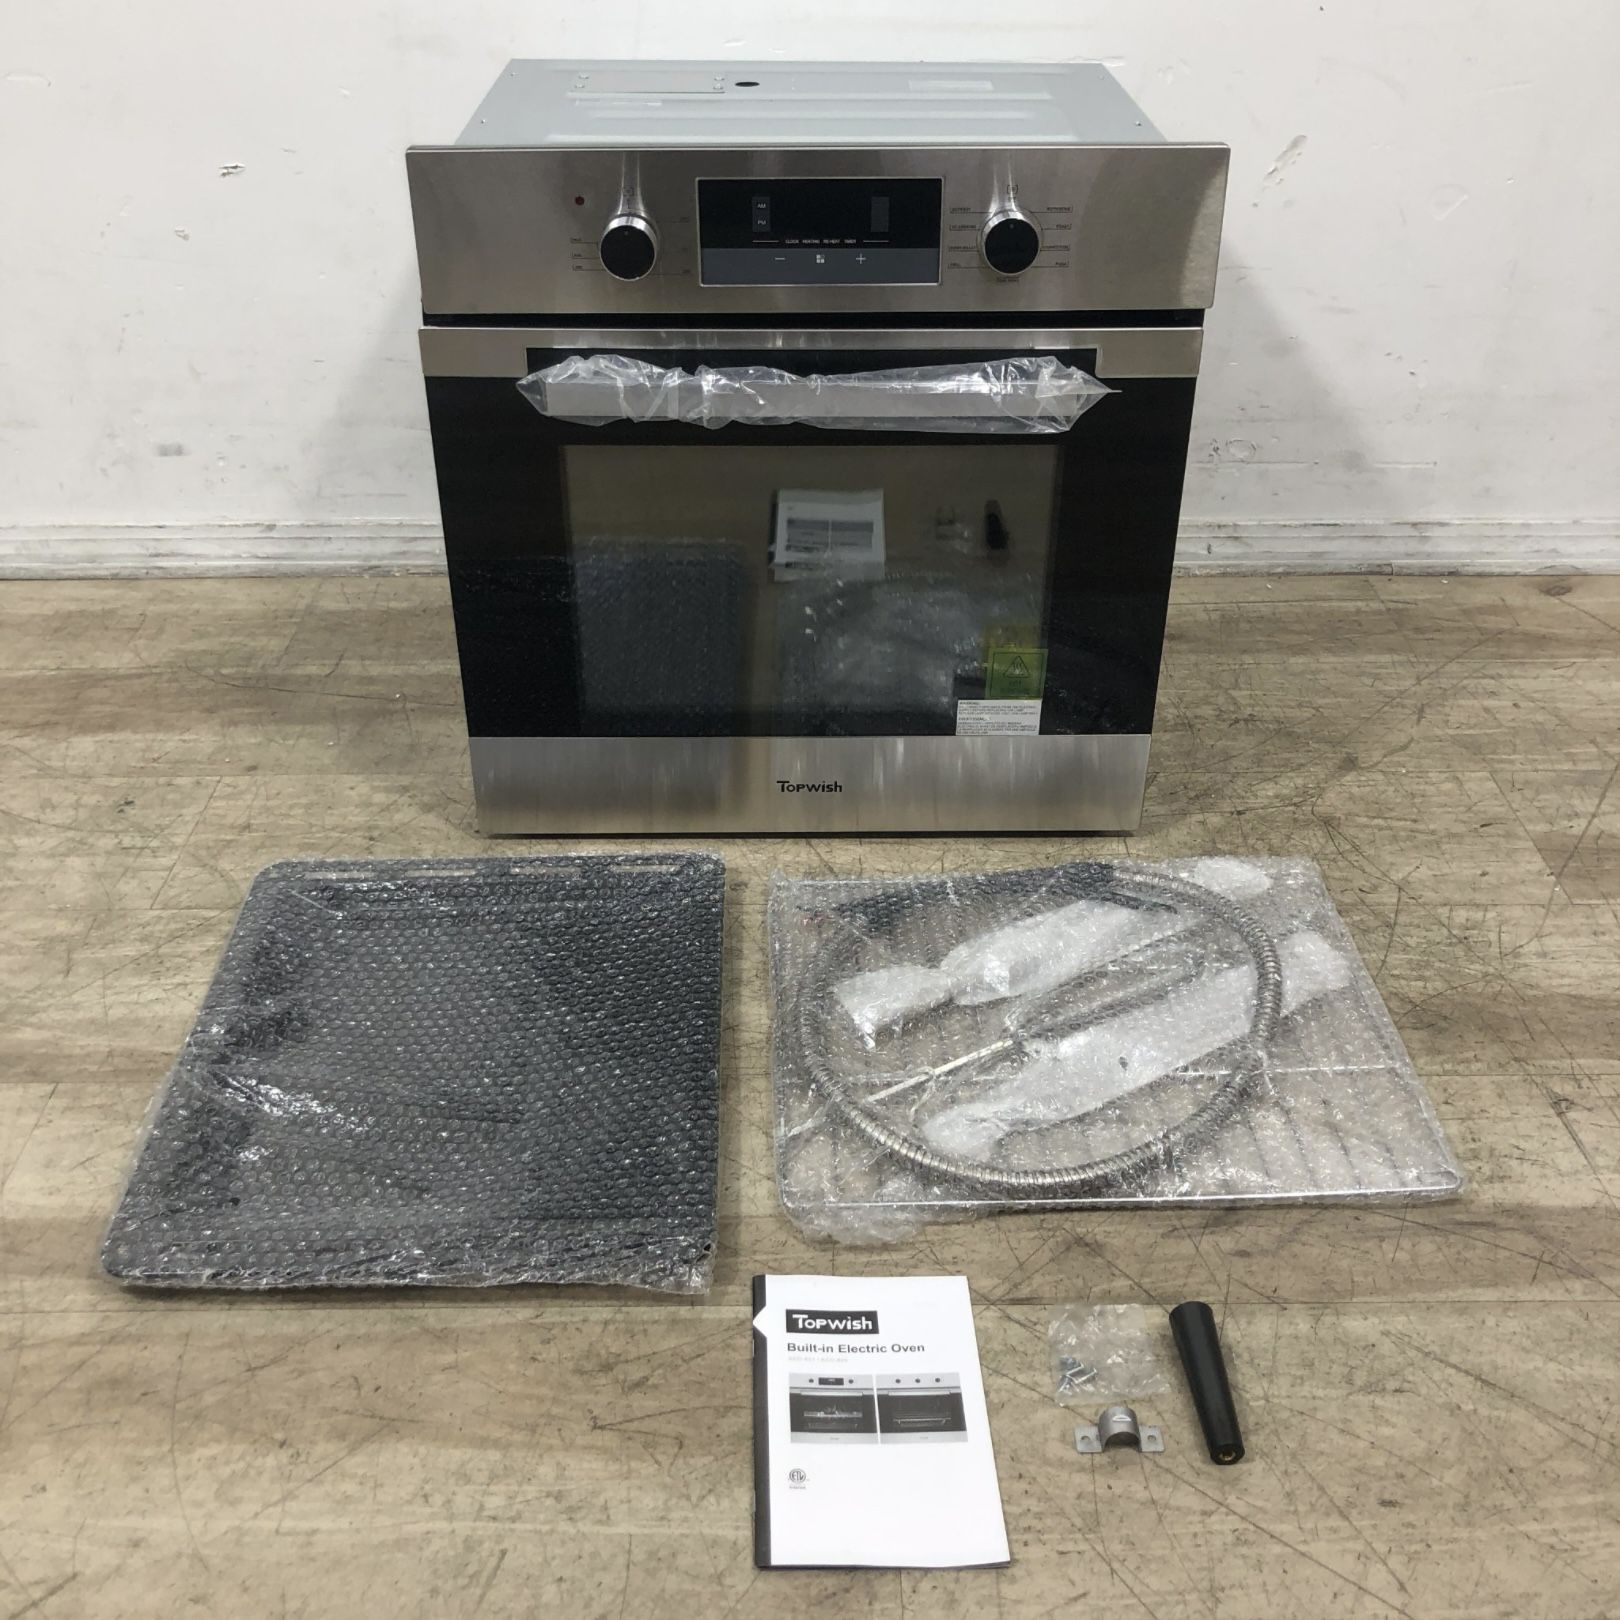 Topwish 24" Built-in Electric Wall Oven